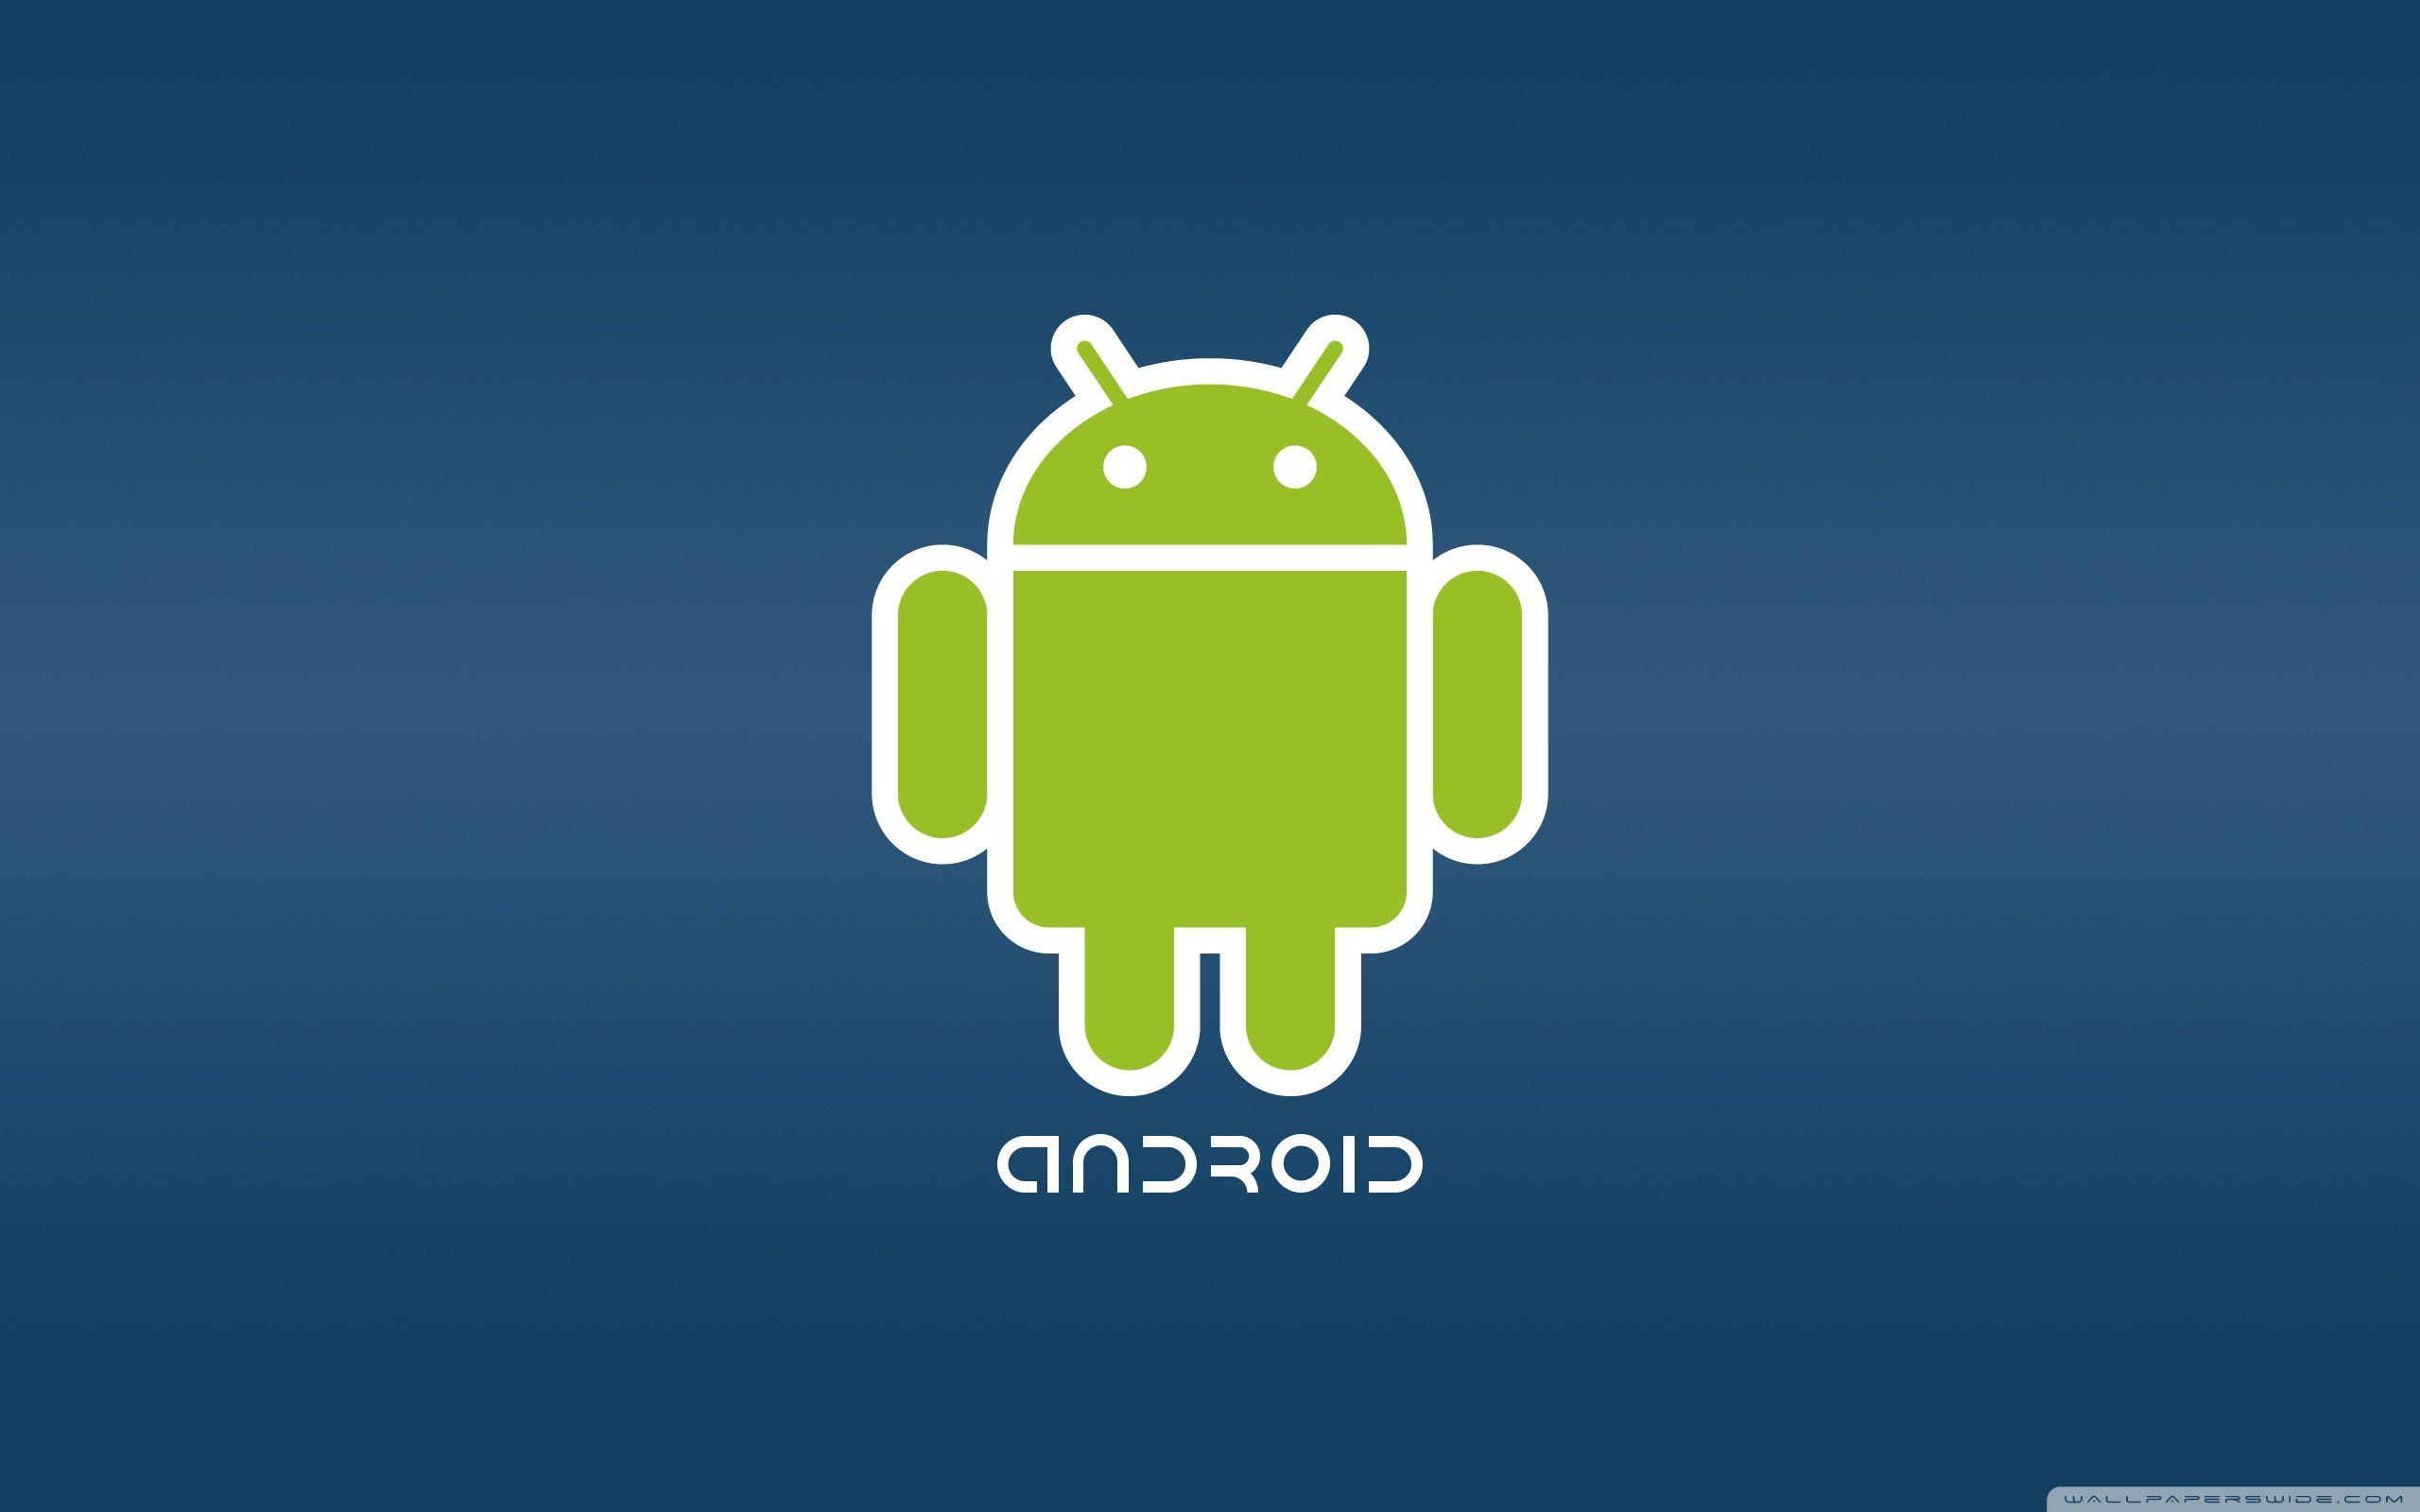 Android Logo Wallpapers Top Free Android Logo Backgrounds Images, Photos, Reviews